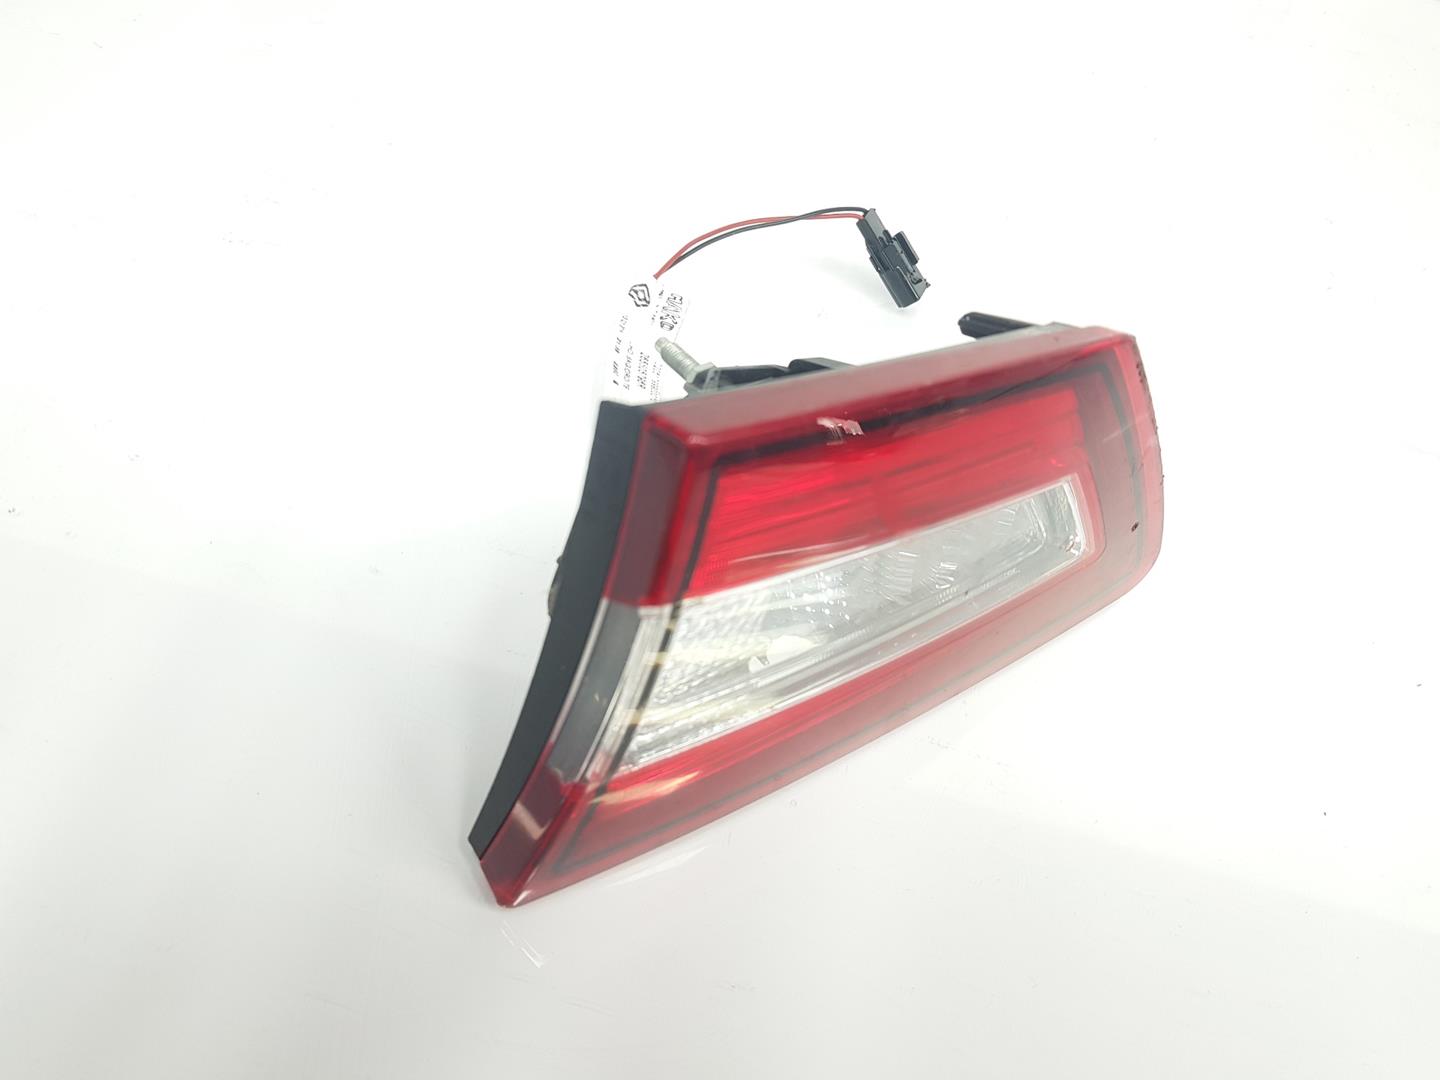 RENAULT Clio 4 generation (2012-2020) Rear Right Taillight Lamp 265505796R, 265505796R 24124449